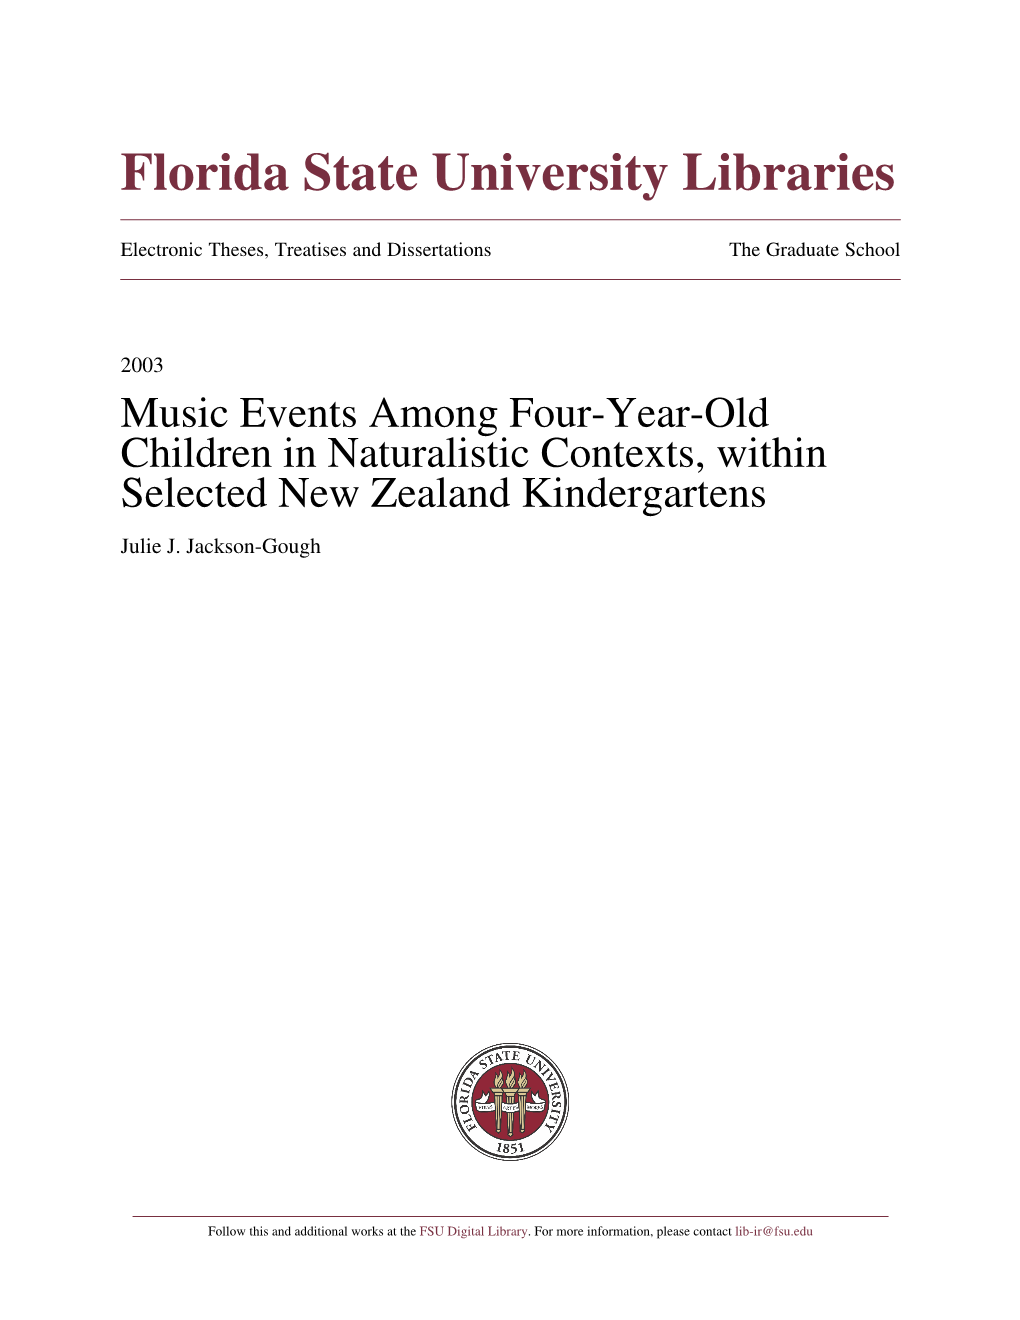 Music Events Among Four-Year-Old Children in Naturalistic Contexts, Within Selected New Zealand Kindergartens Julie J